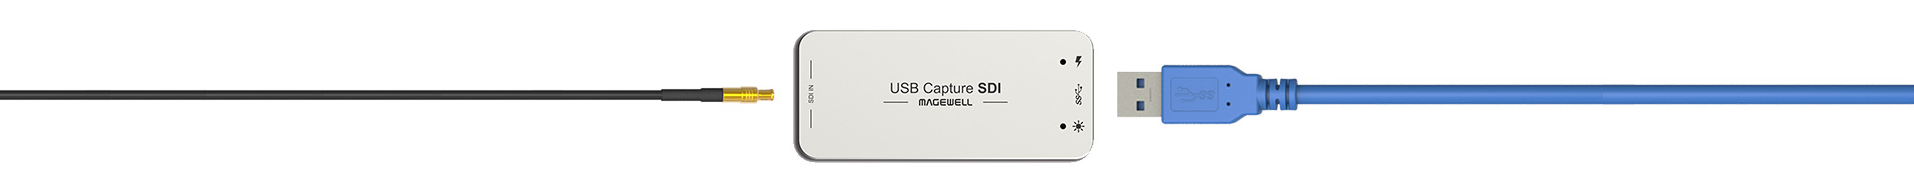 Magewell_USB_Connection